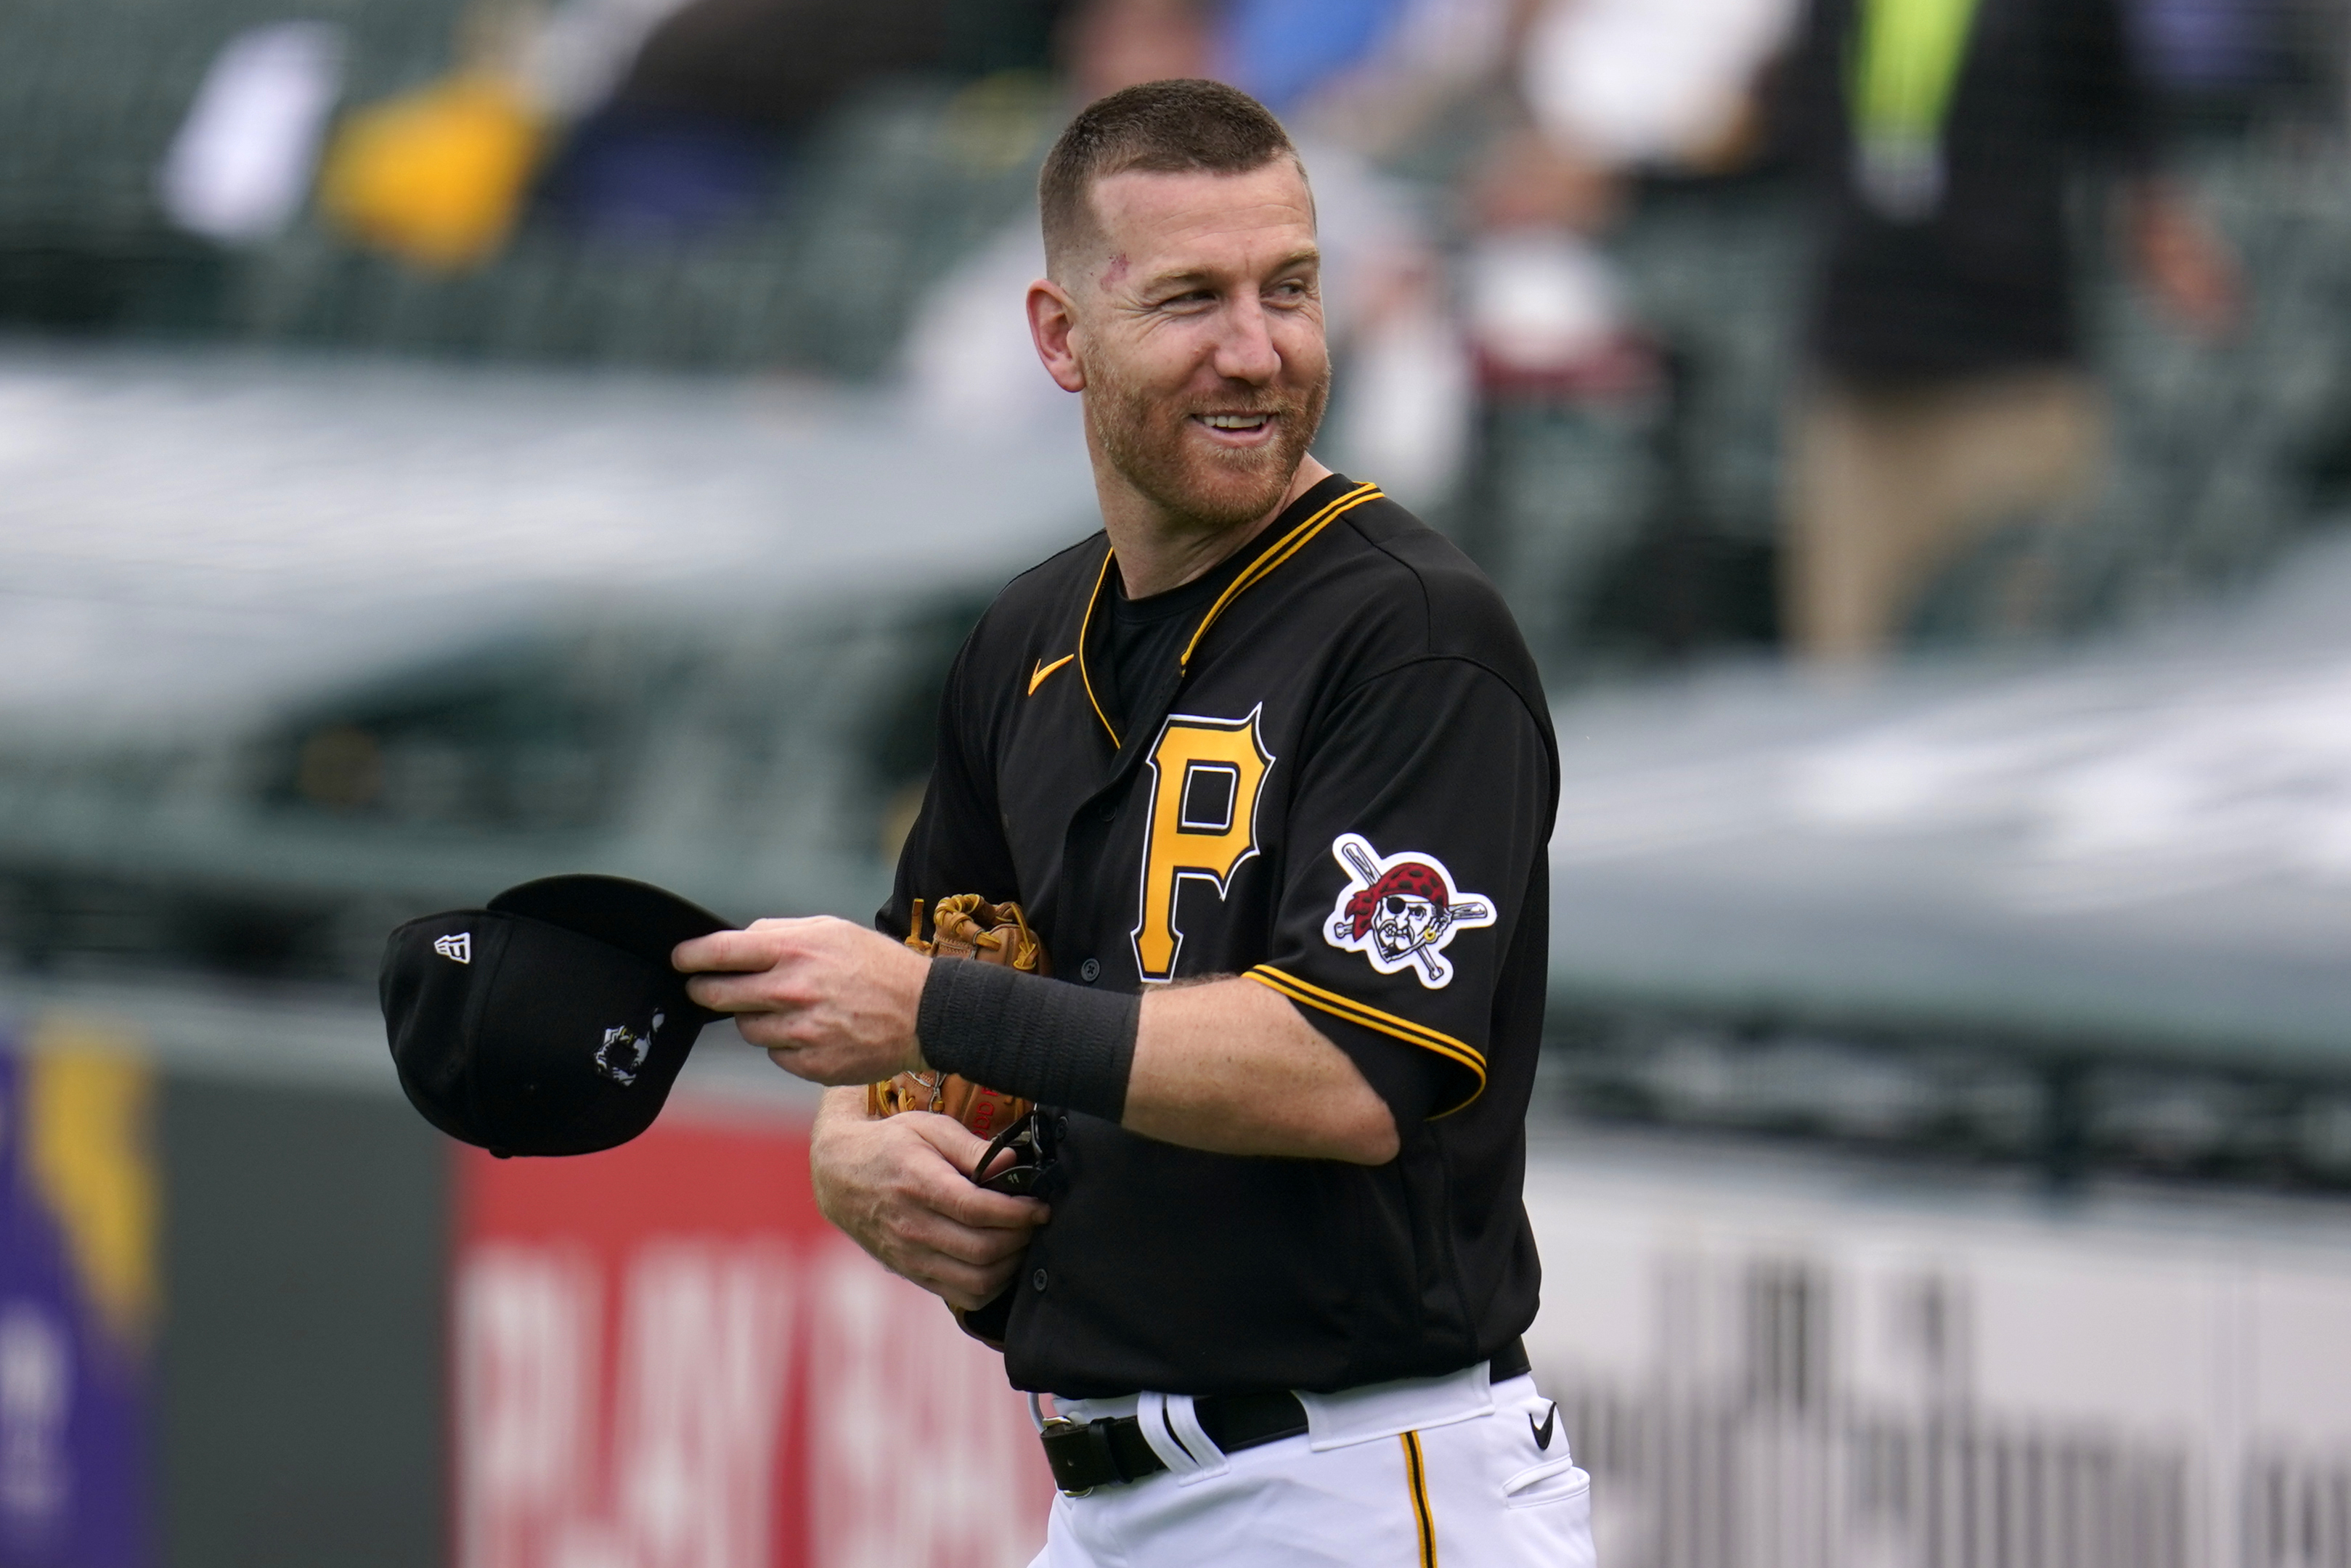 Ex-Yankees, Mets, Rutgers star Todd Frazier is returning to N.J.